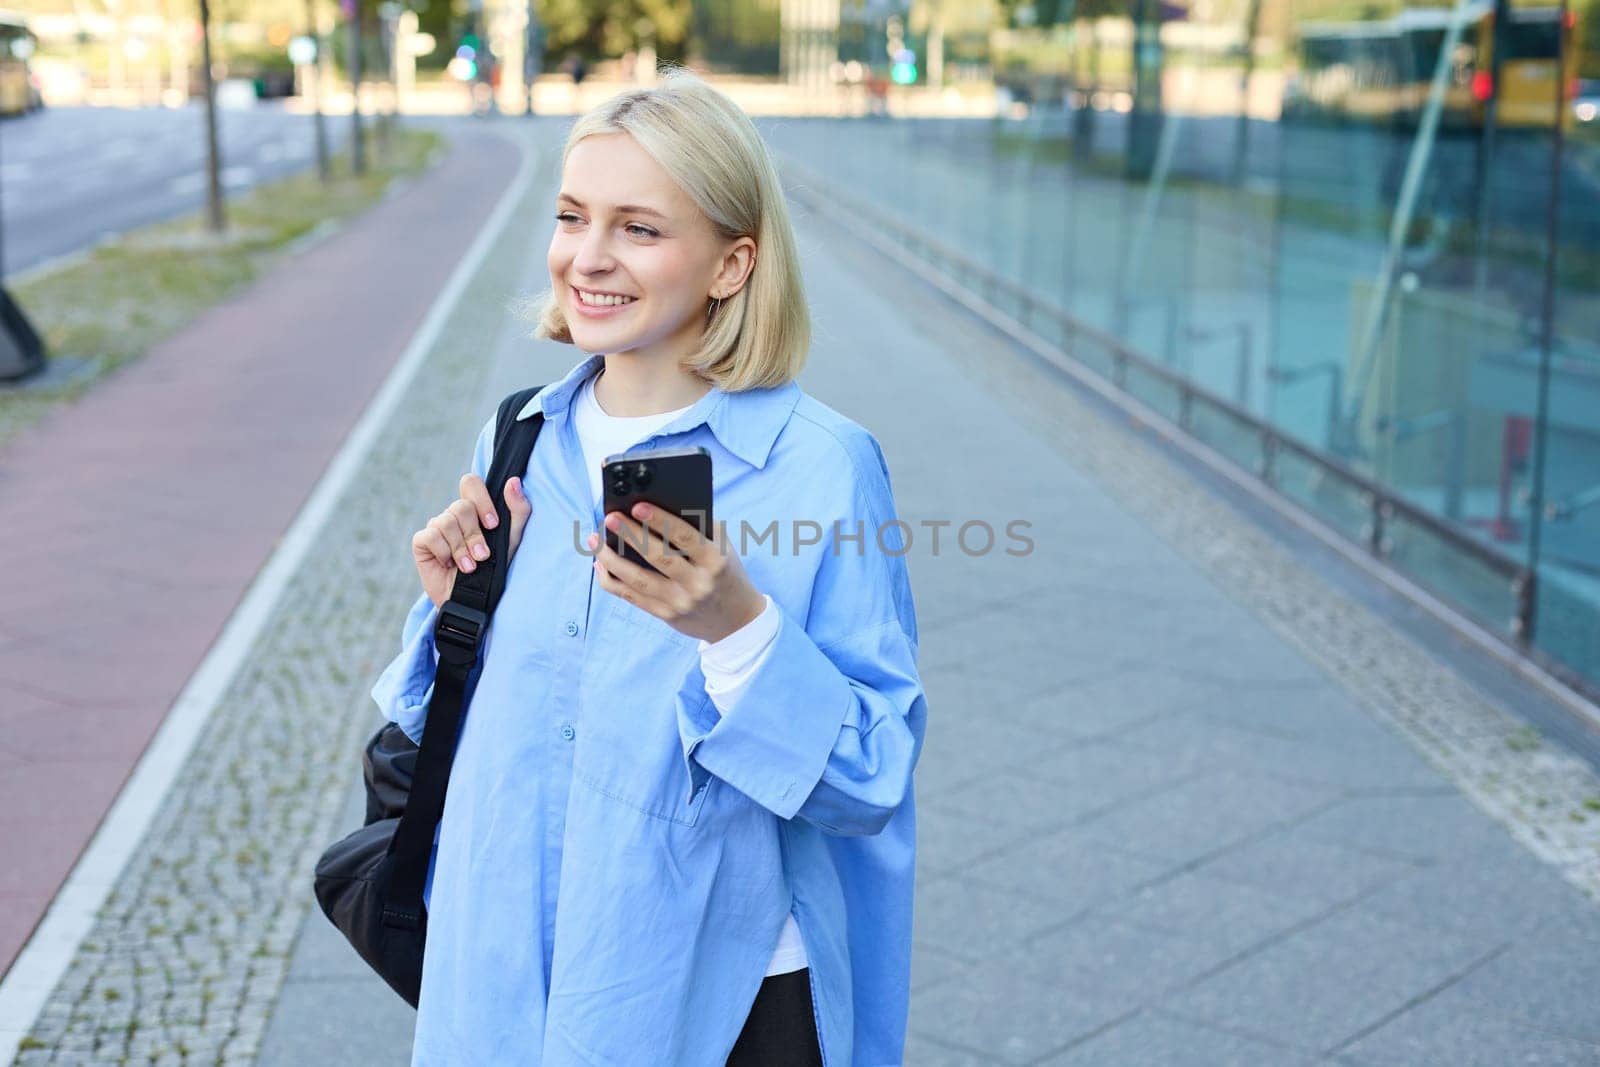 Portrait of smiling, modern blond woman walking along the street in blue collar shirt, has backpack on shoulder, messaging, using mobile phone app.